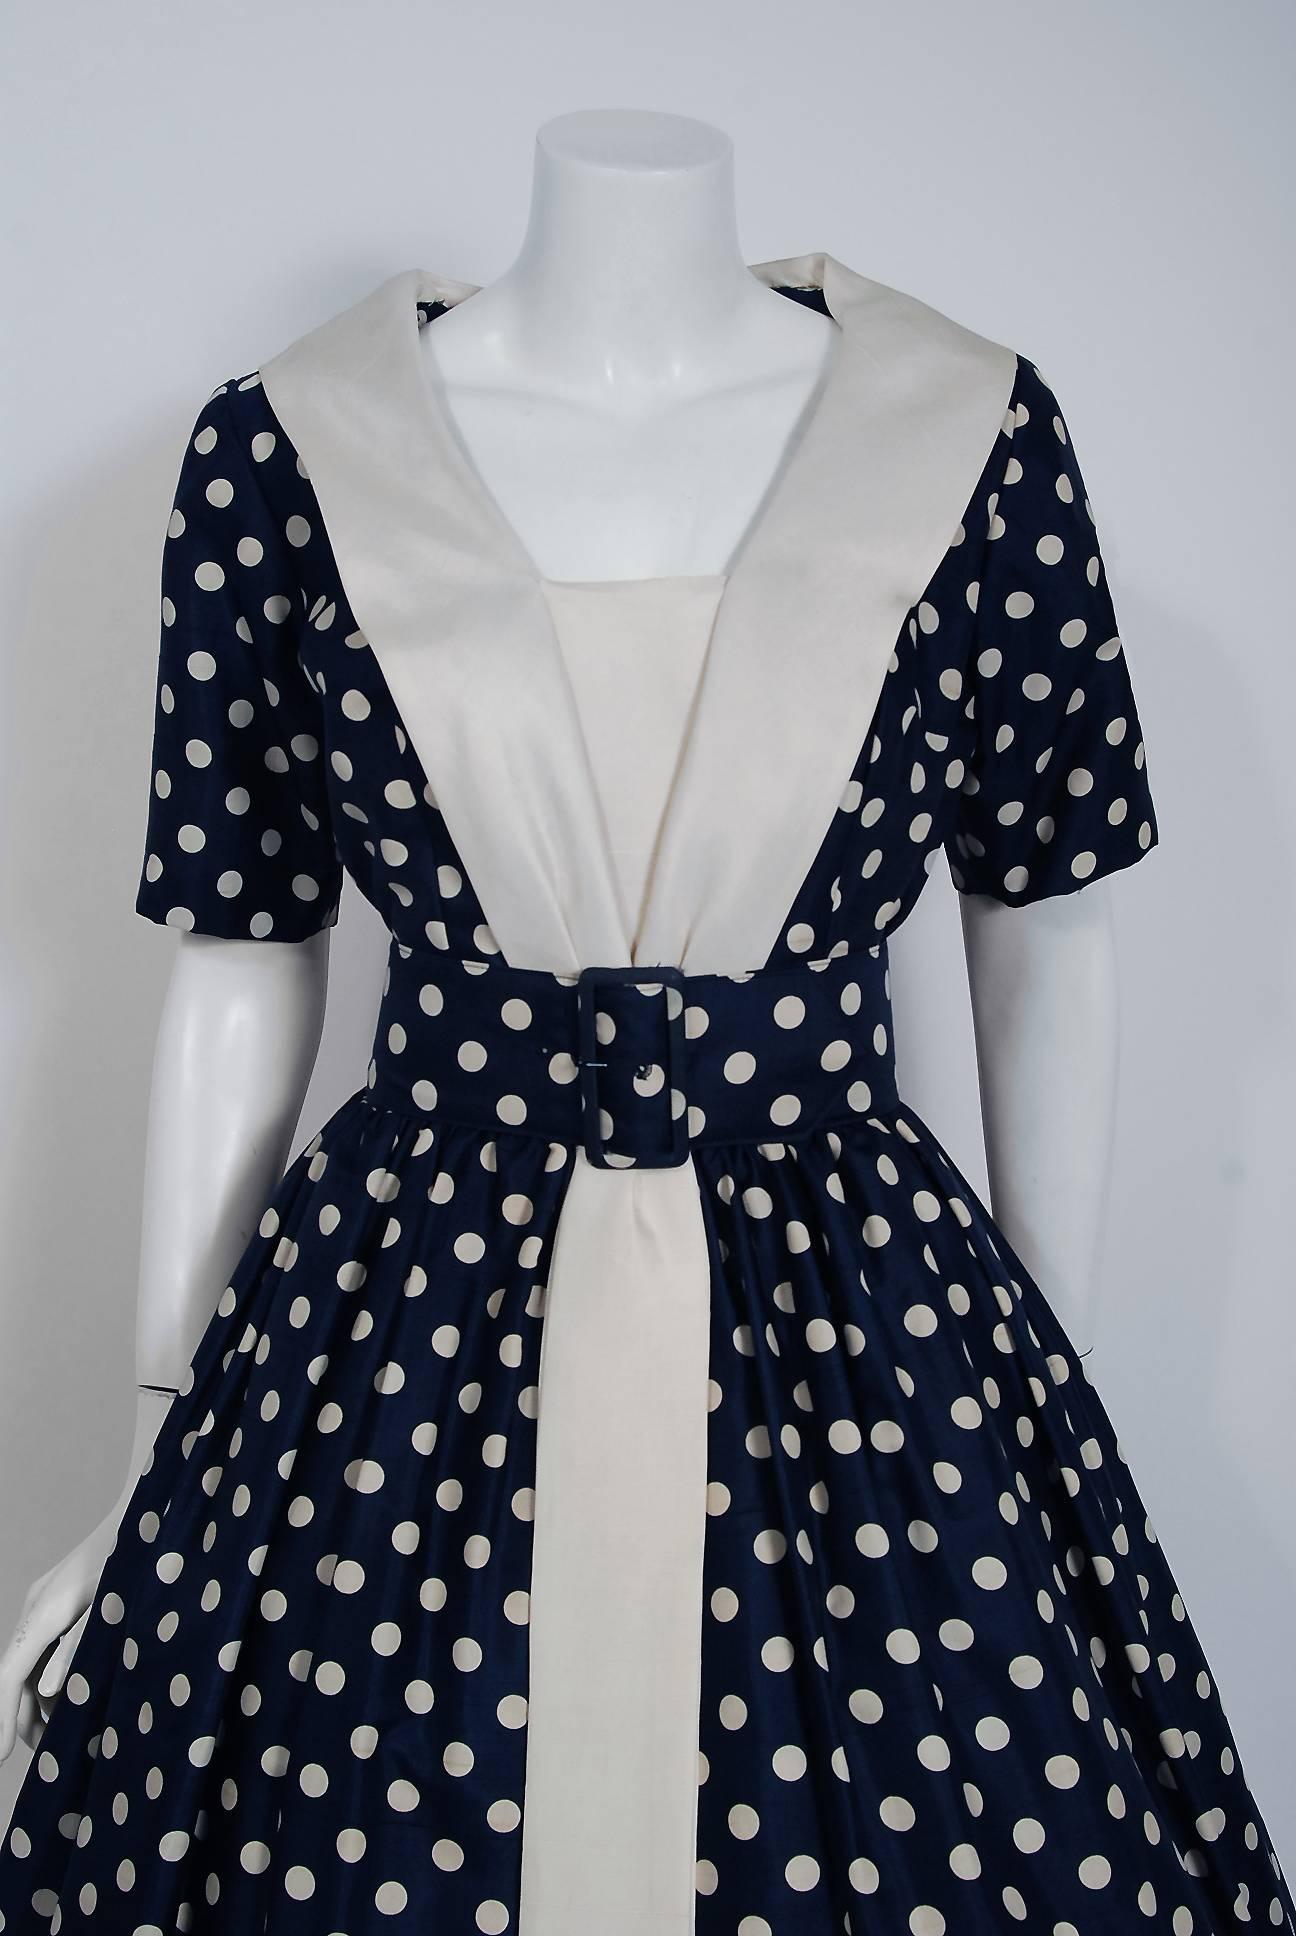 Gorgeous Suzy Perette designer navy and ivory polka-dot print silk party dress dating back to the mid 1950's. Suzy Perette was not an actual person, but the name of a dress manufacturing company that made affordable versions of haute-couture